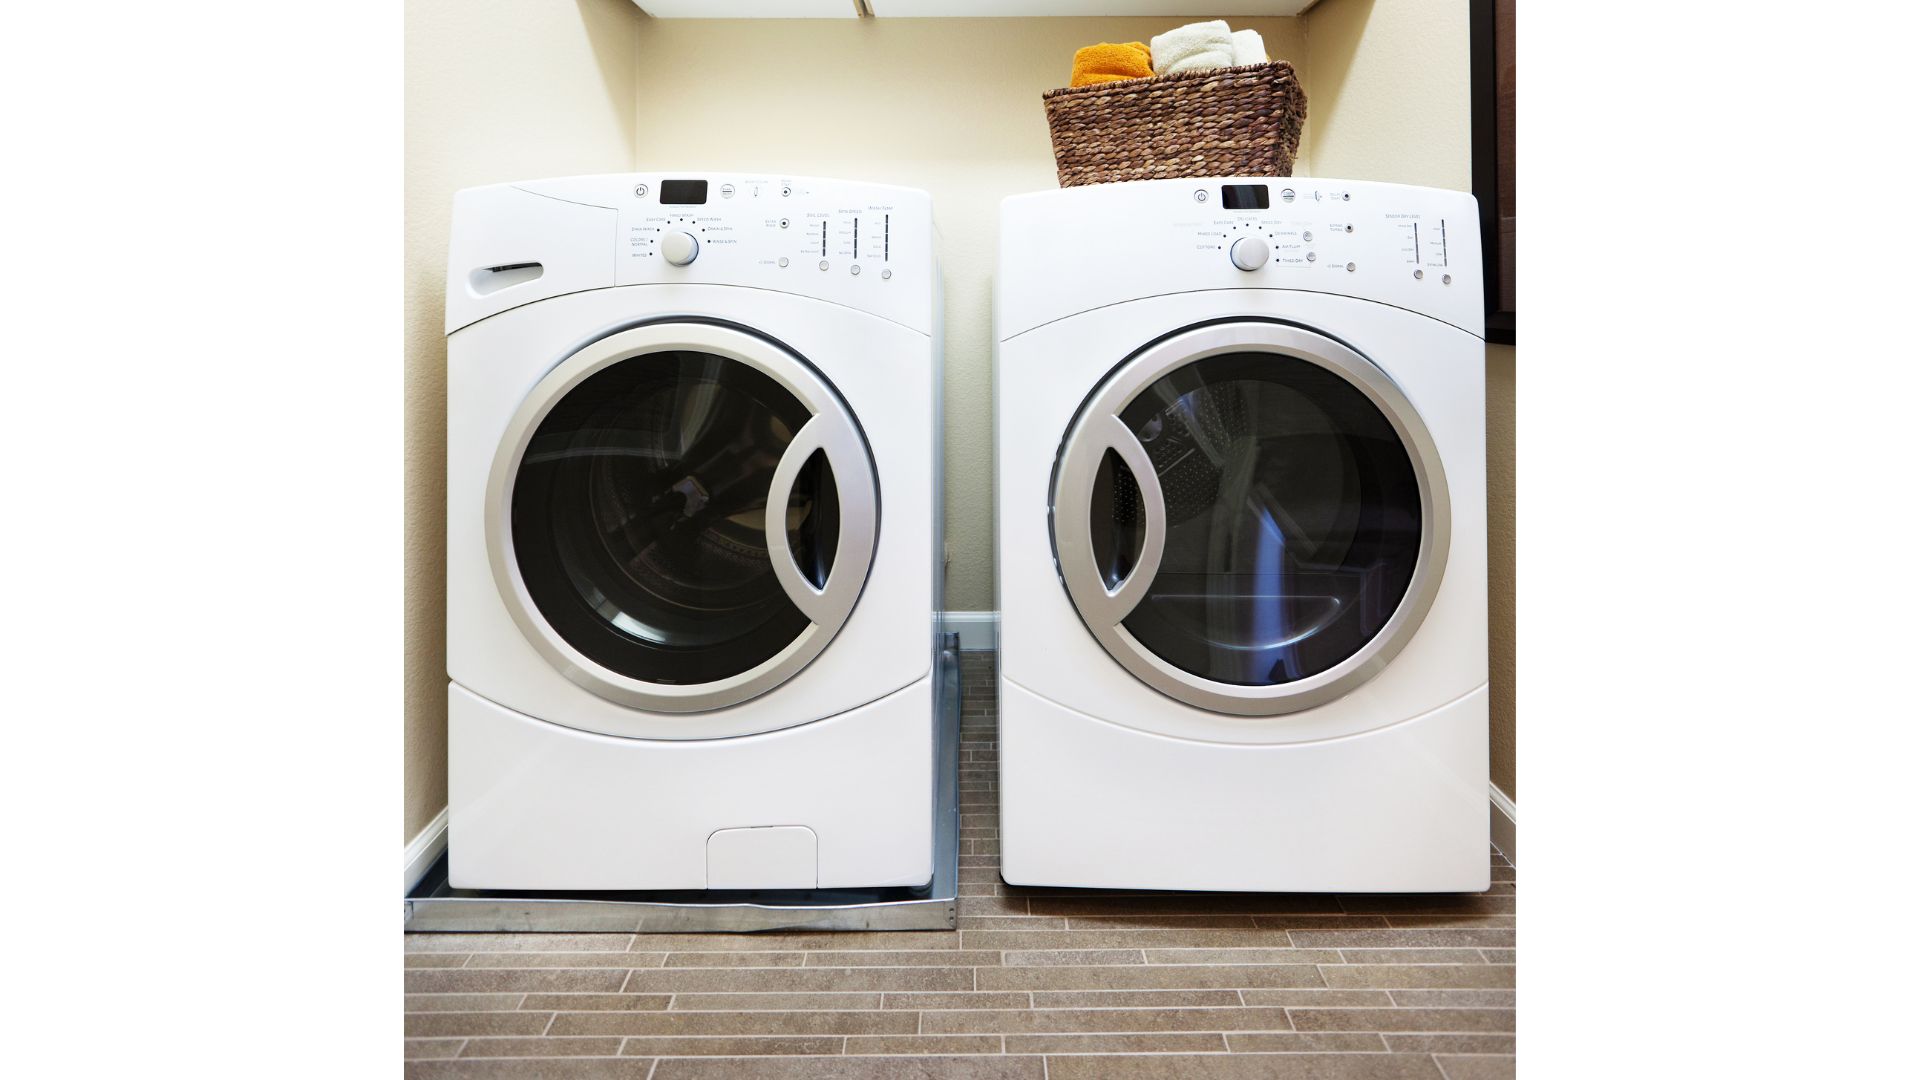 do GE, samsung, lg, electrolux, maytag, whirlpool, kenmore front load washers have reversible doors